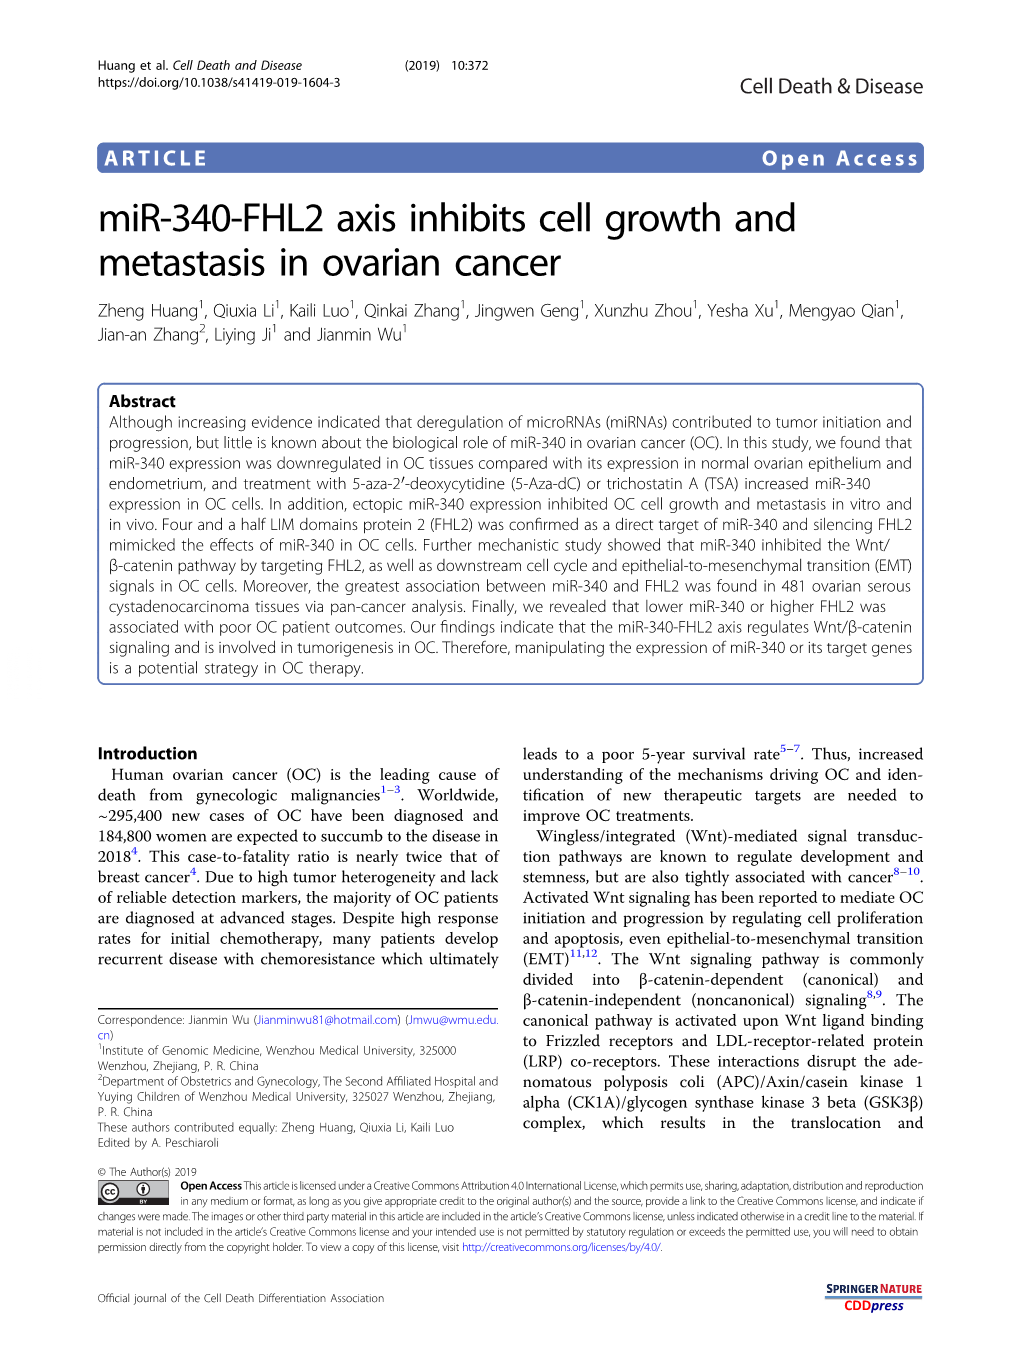 Mir-340-FHL2 Axis Inhibits Cell Growth and Metastasis in Ovarian